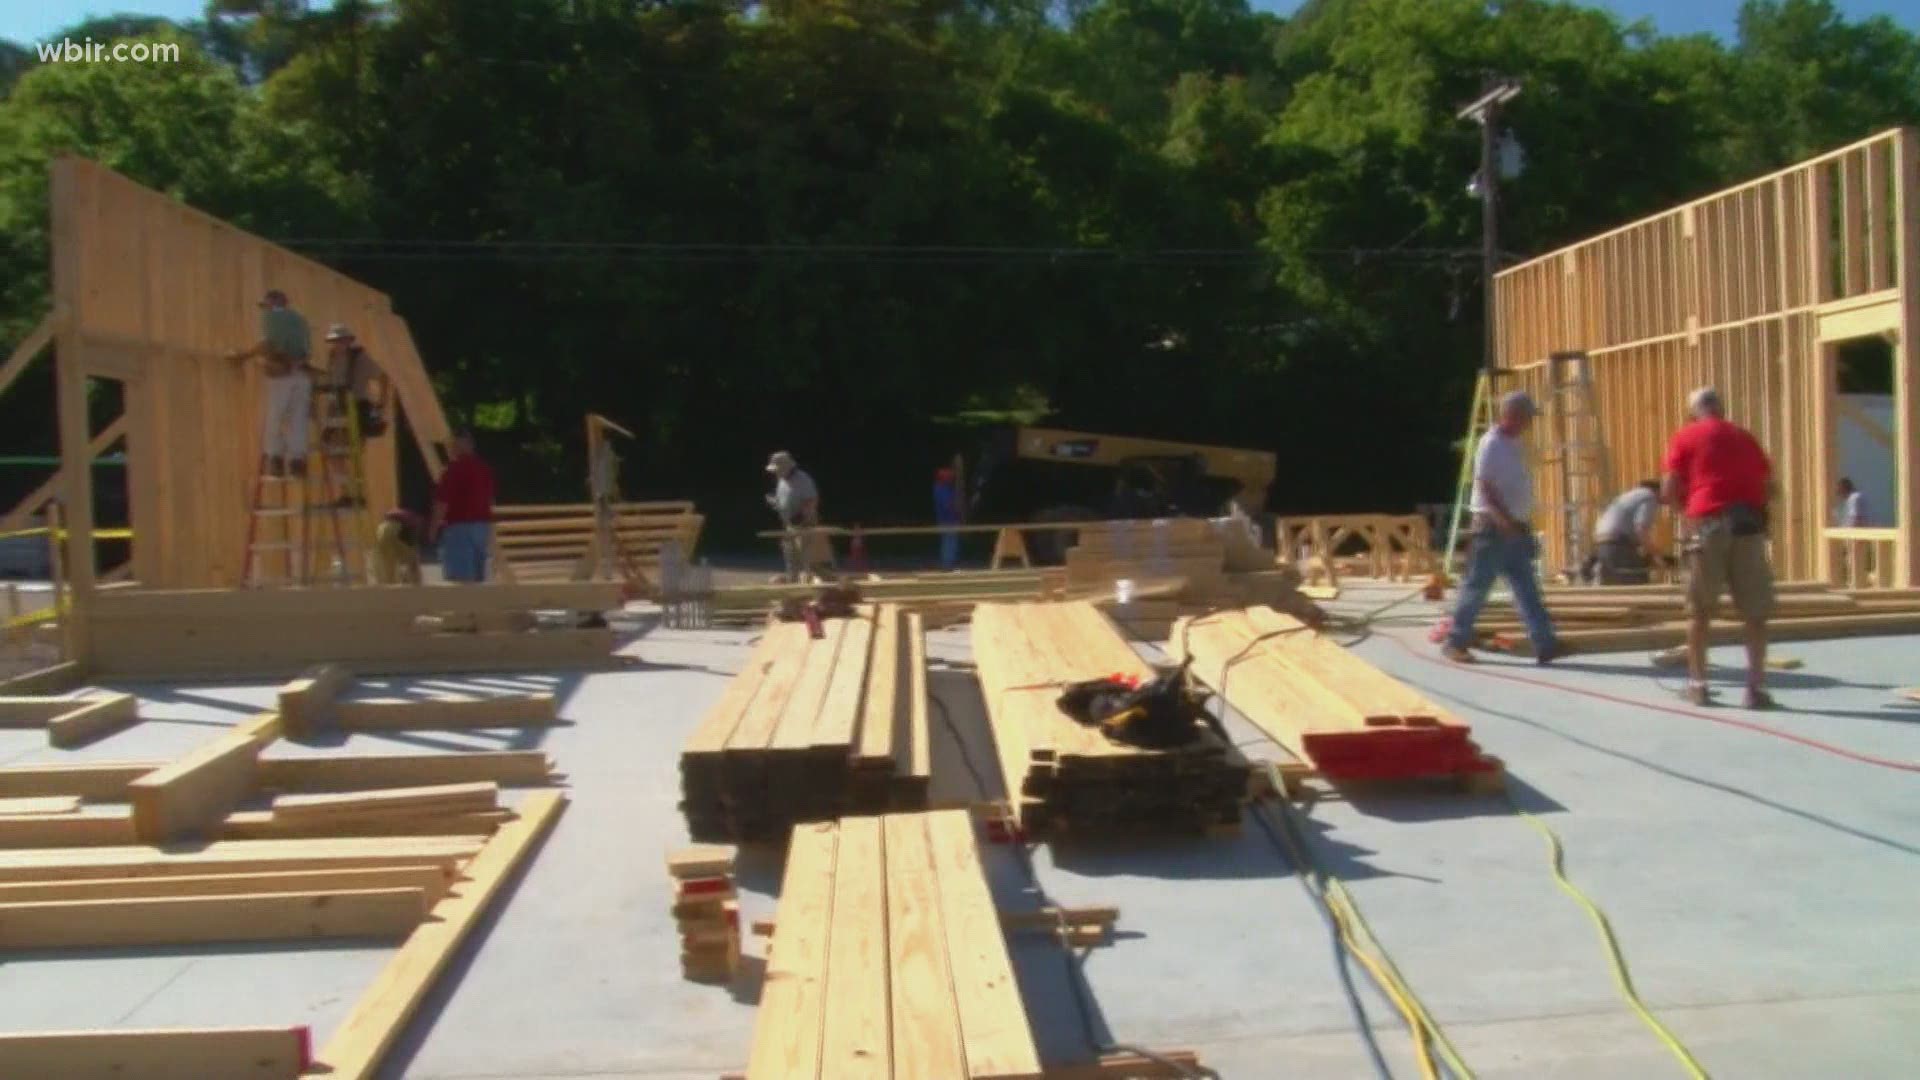 A church in Morristown is rebuilding after devastating fire.